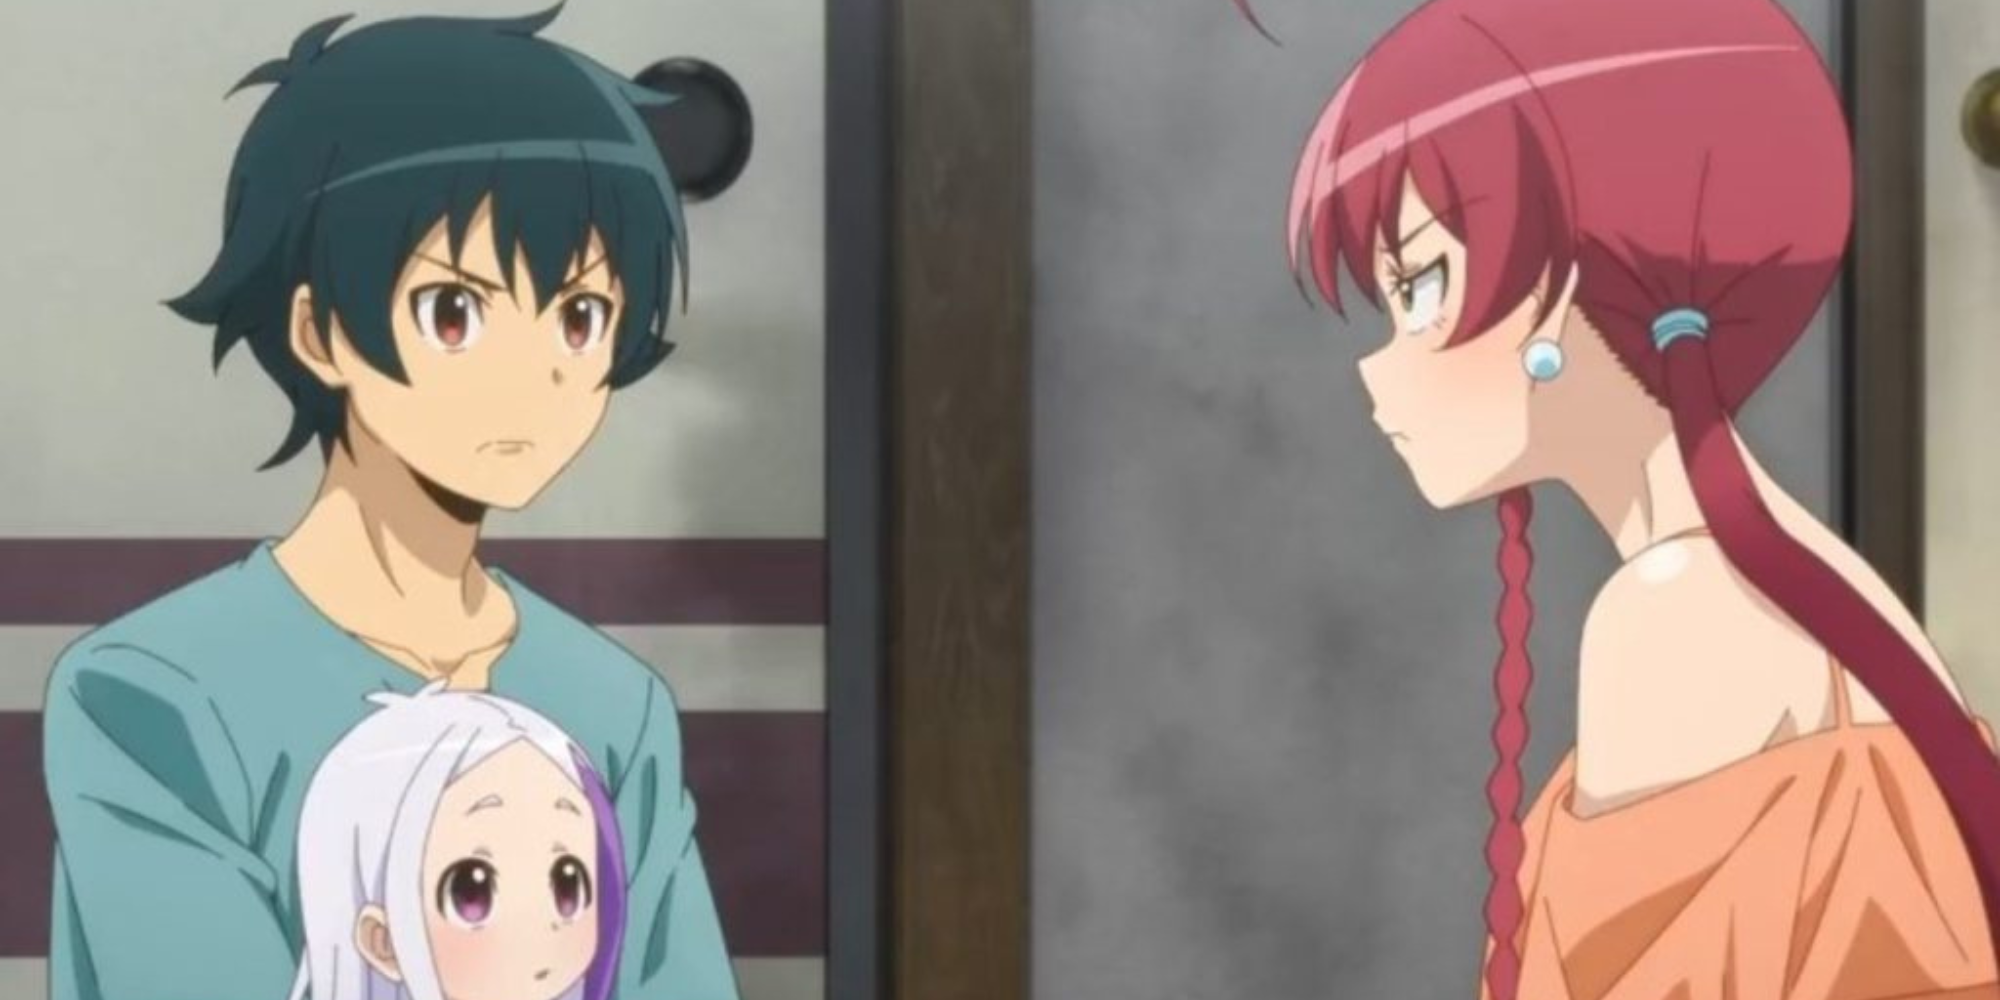 The Devil Is A Part timer Season 2 New Episode 12 Explained in